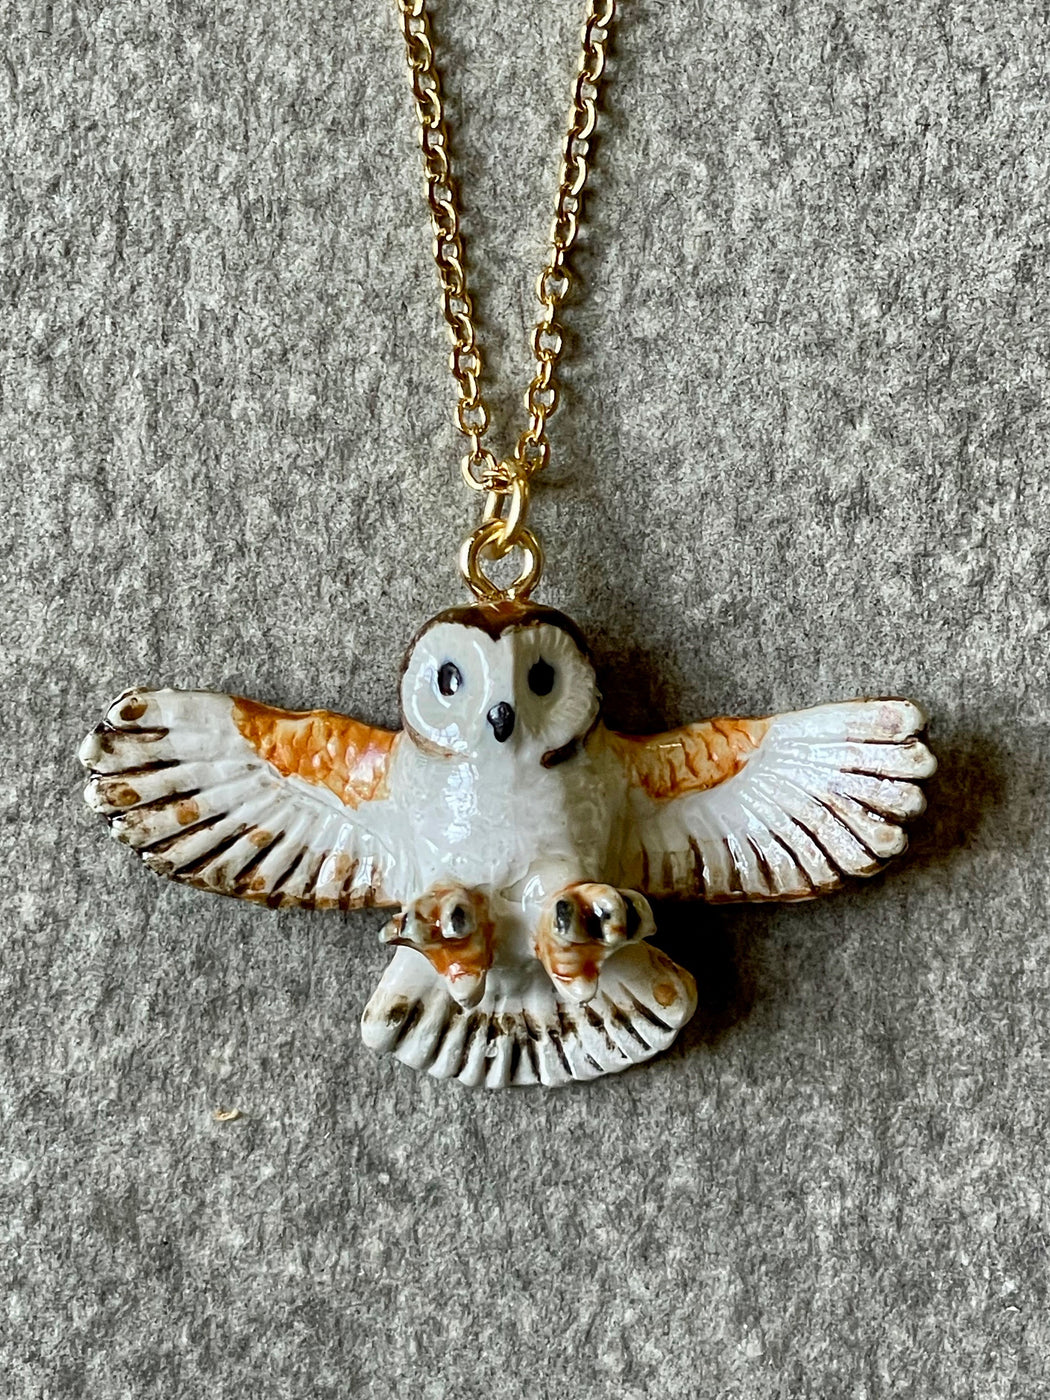 Porcelain "Barn Owl" Pendant by Camp Hollow